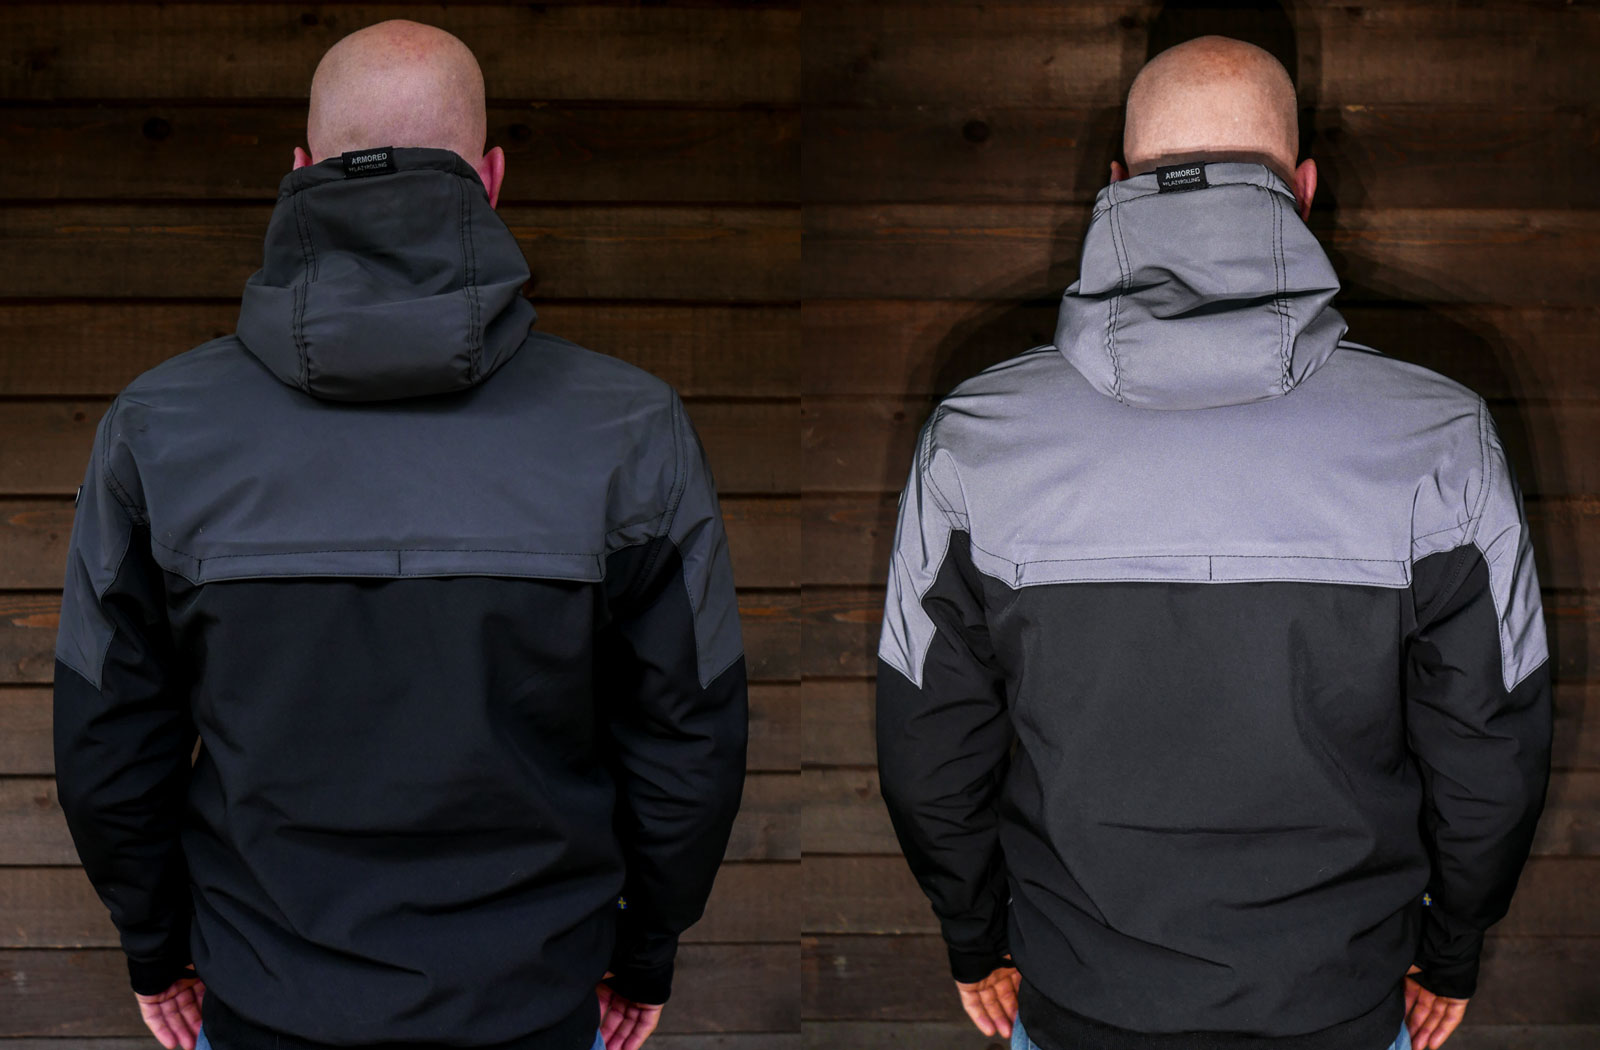 Riding Gear Review - Lazyrolling Armored Reflective Jacket